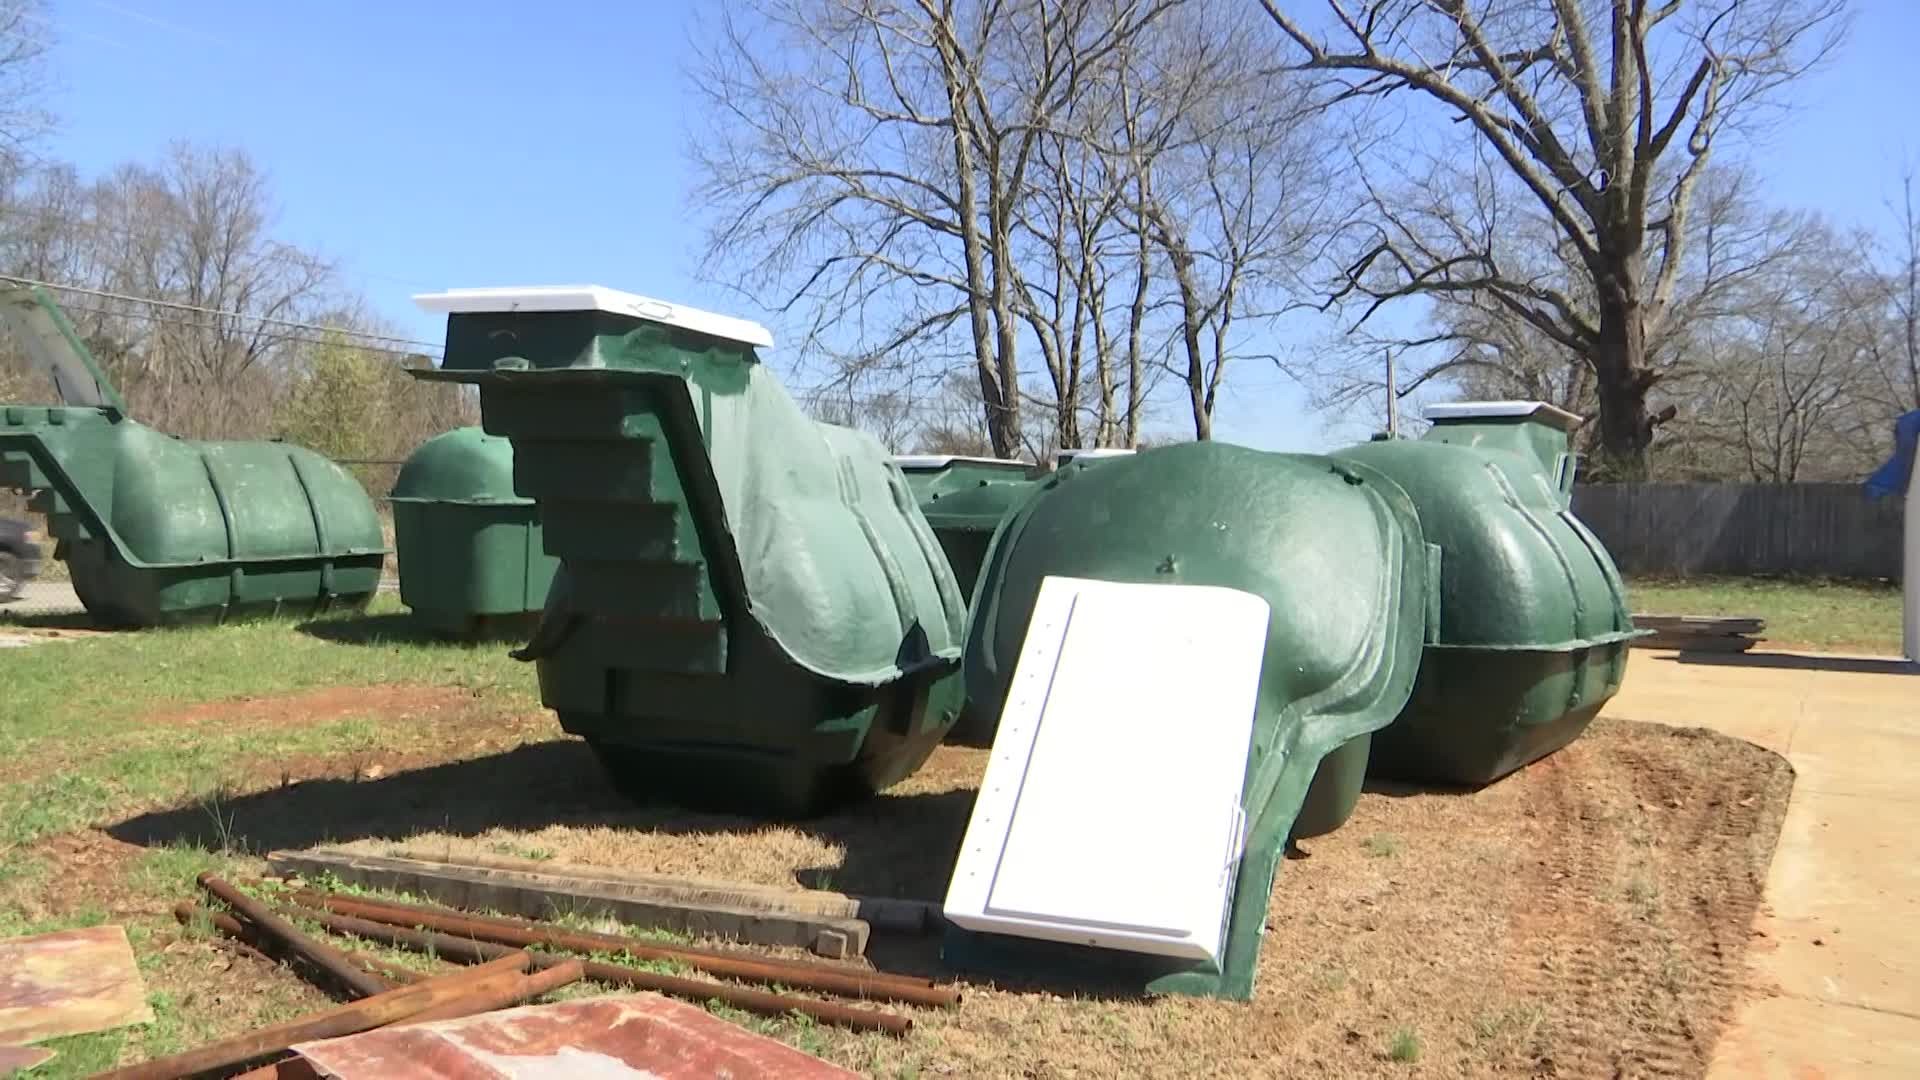 Lifesaver Storm Shelters of North Alabama are the only Tennessee Valley shelter company that offers lifetime warranties on their personal shelters.